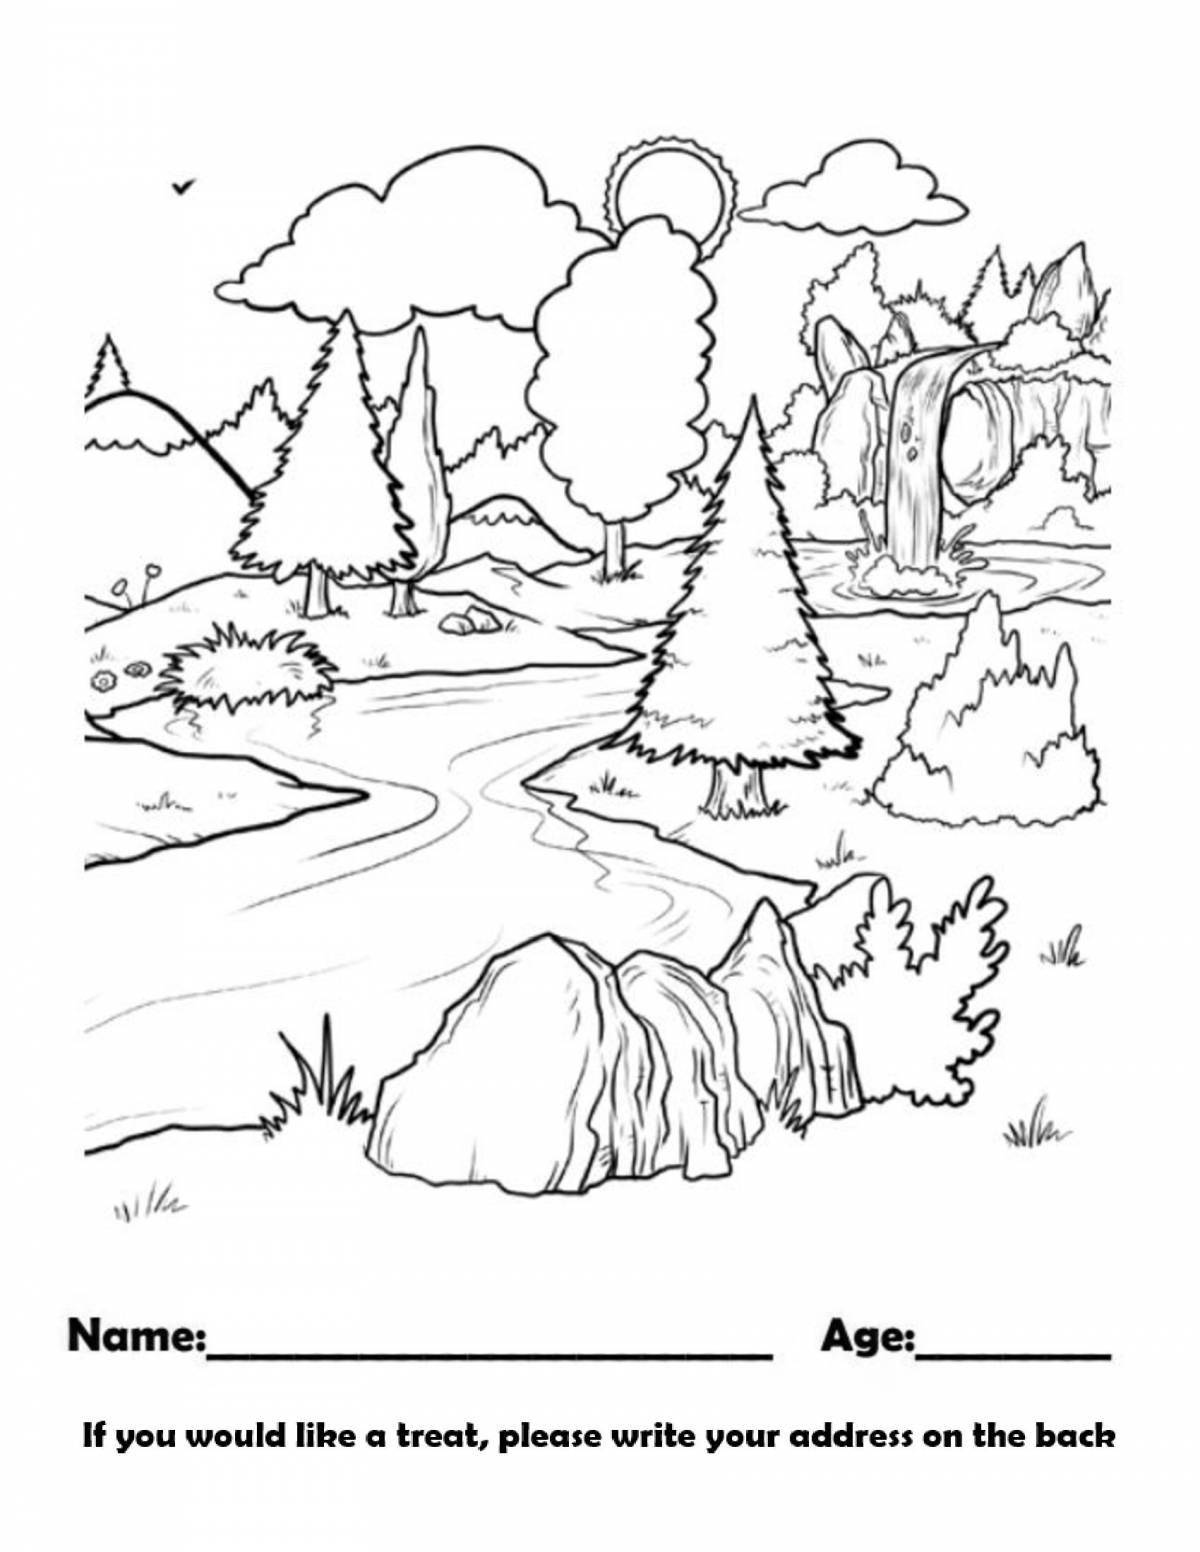 A wonderful nature coloring book for 7-8 year olds